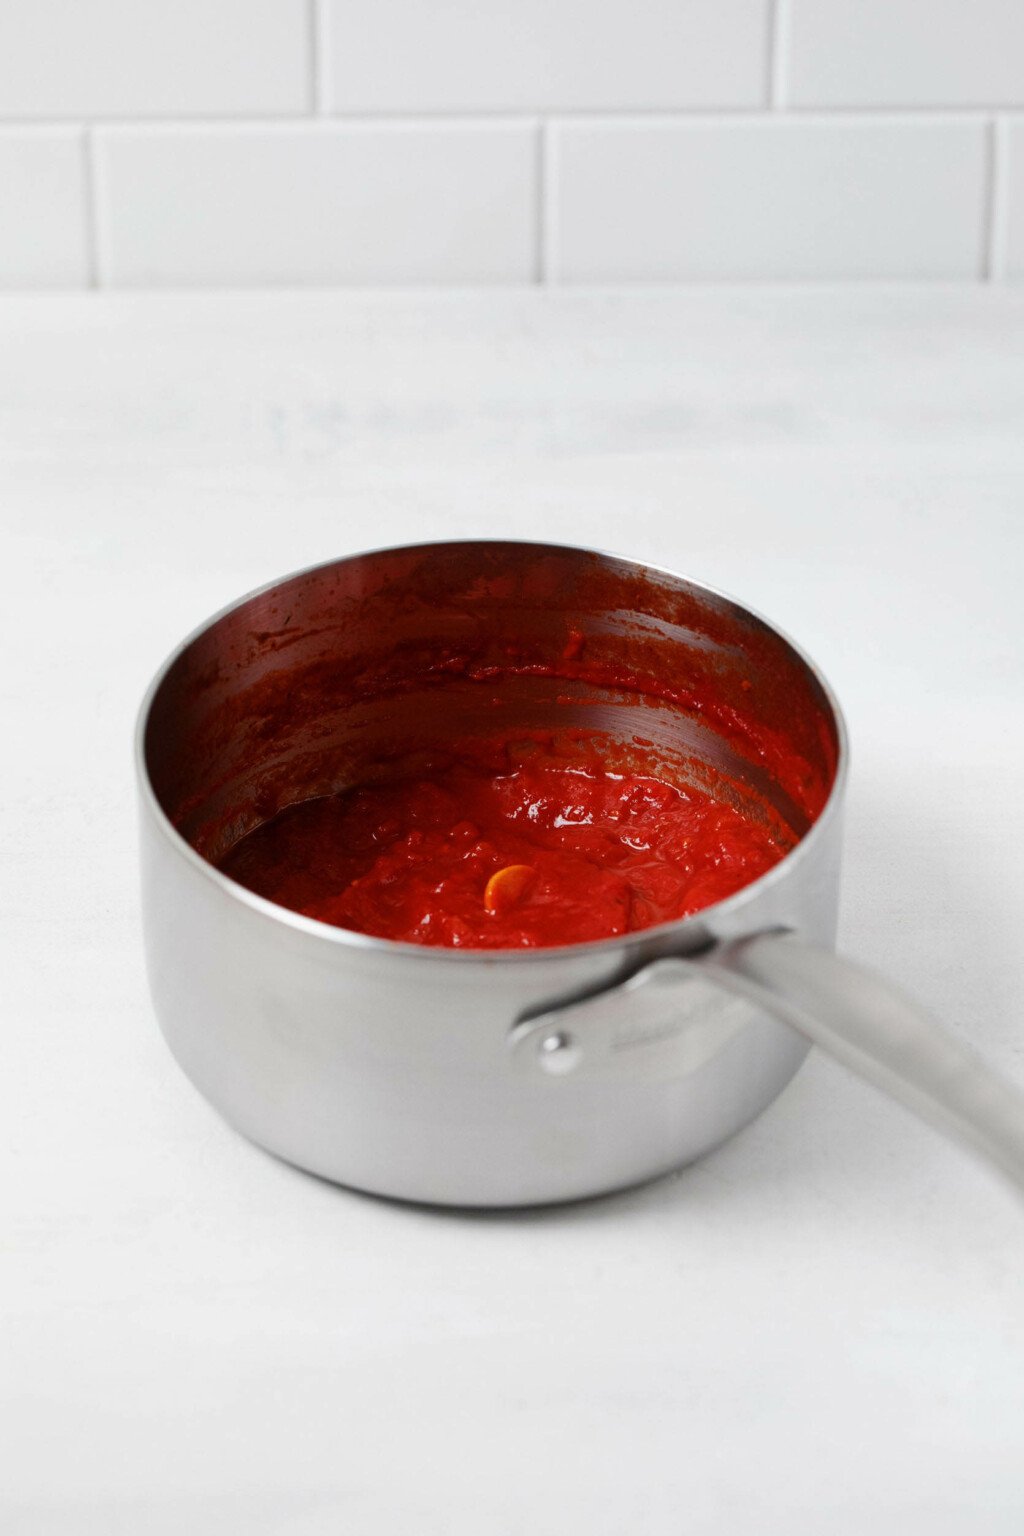 A stainless steel pot is being used to simmer a 20 minute, homemade marinara sauce.